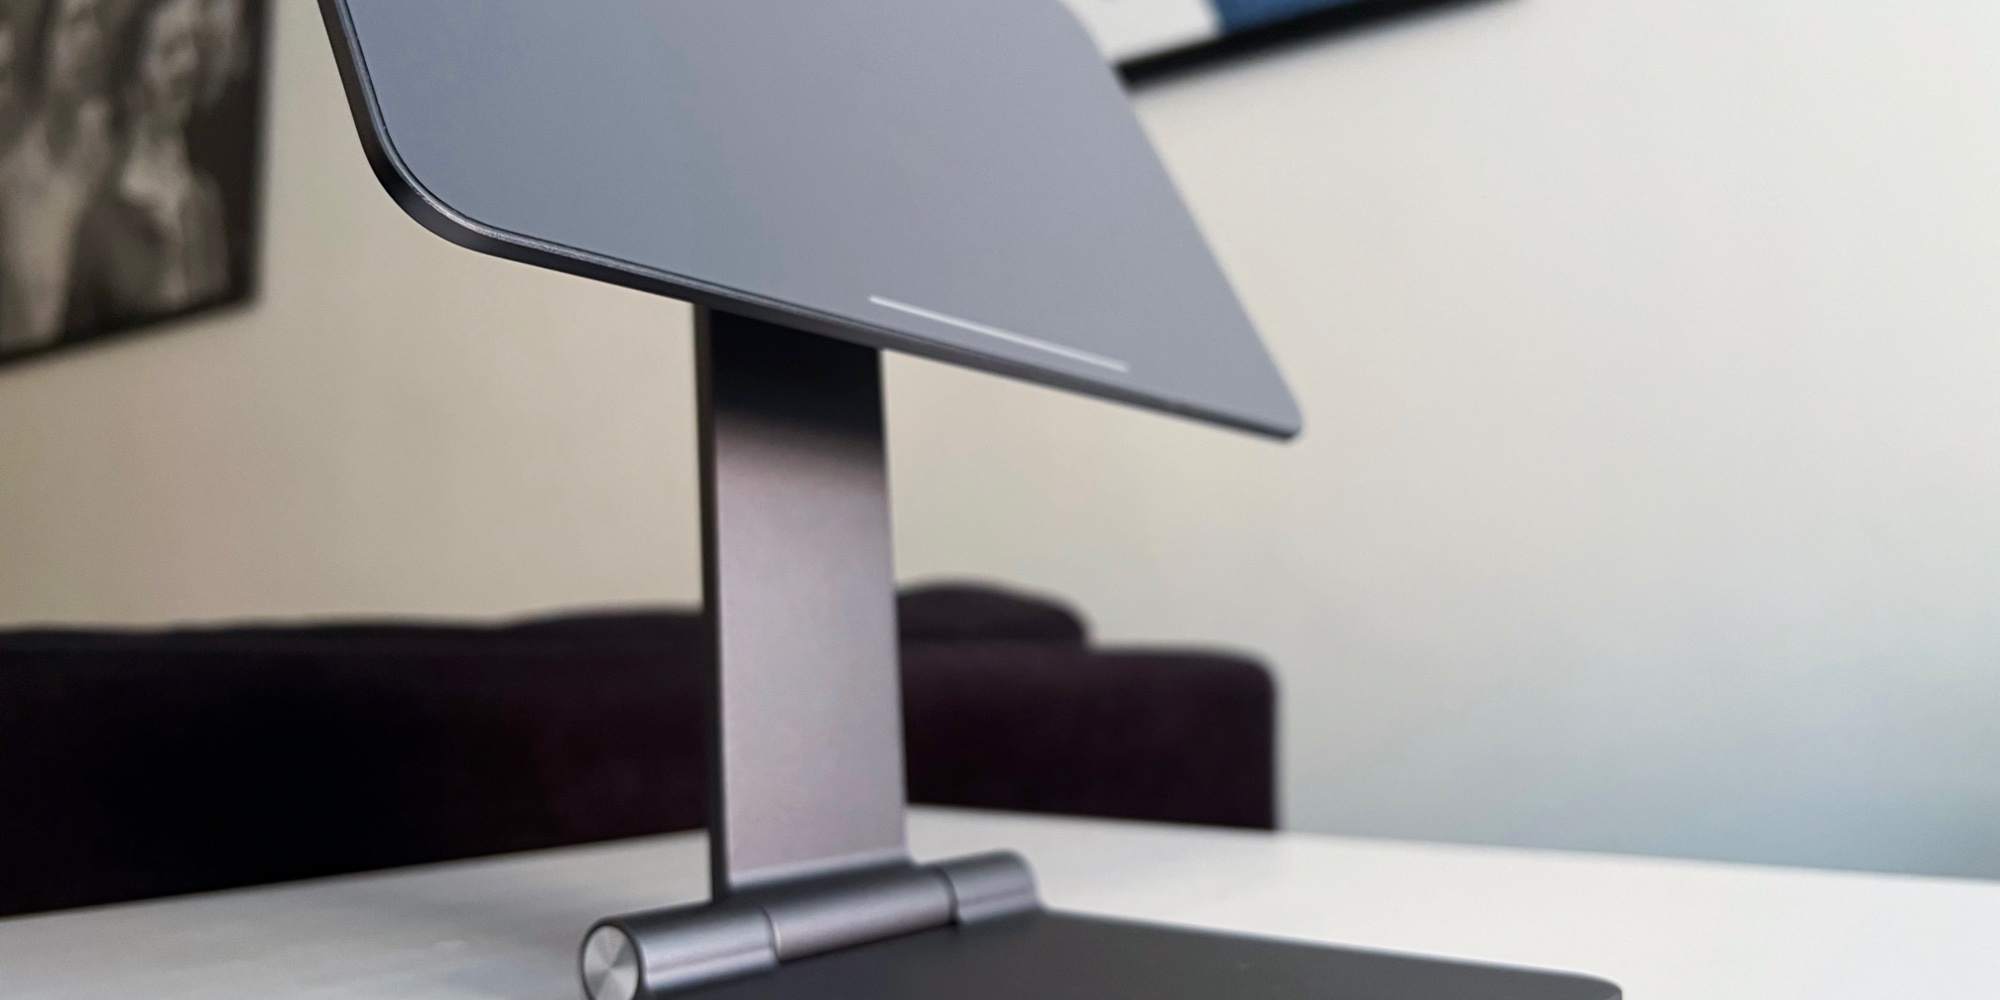 Review: Lululook Foldable Magnetic iPad Air/Pro Stand - 9to5Mac